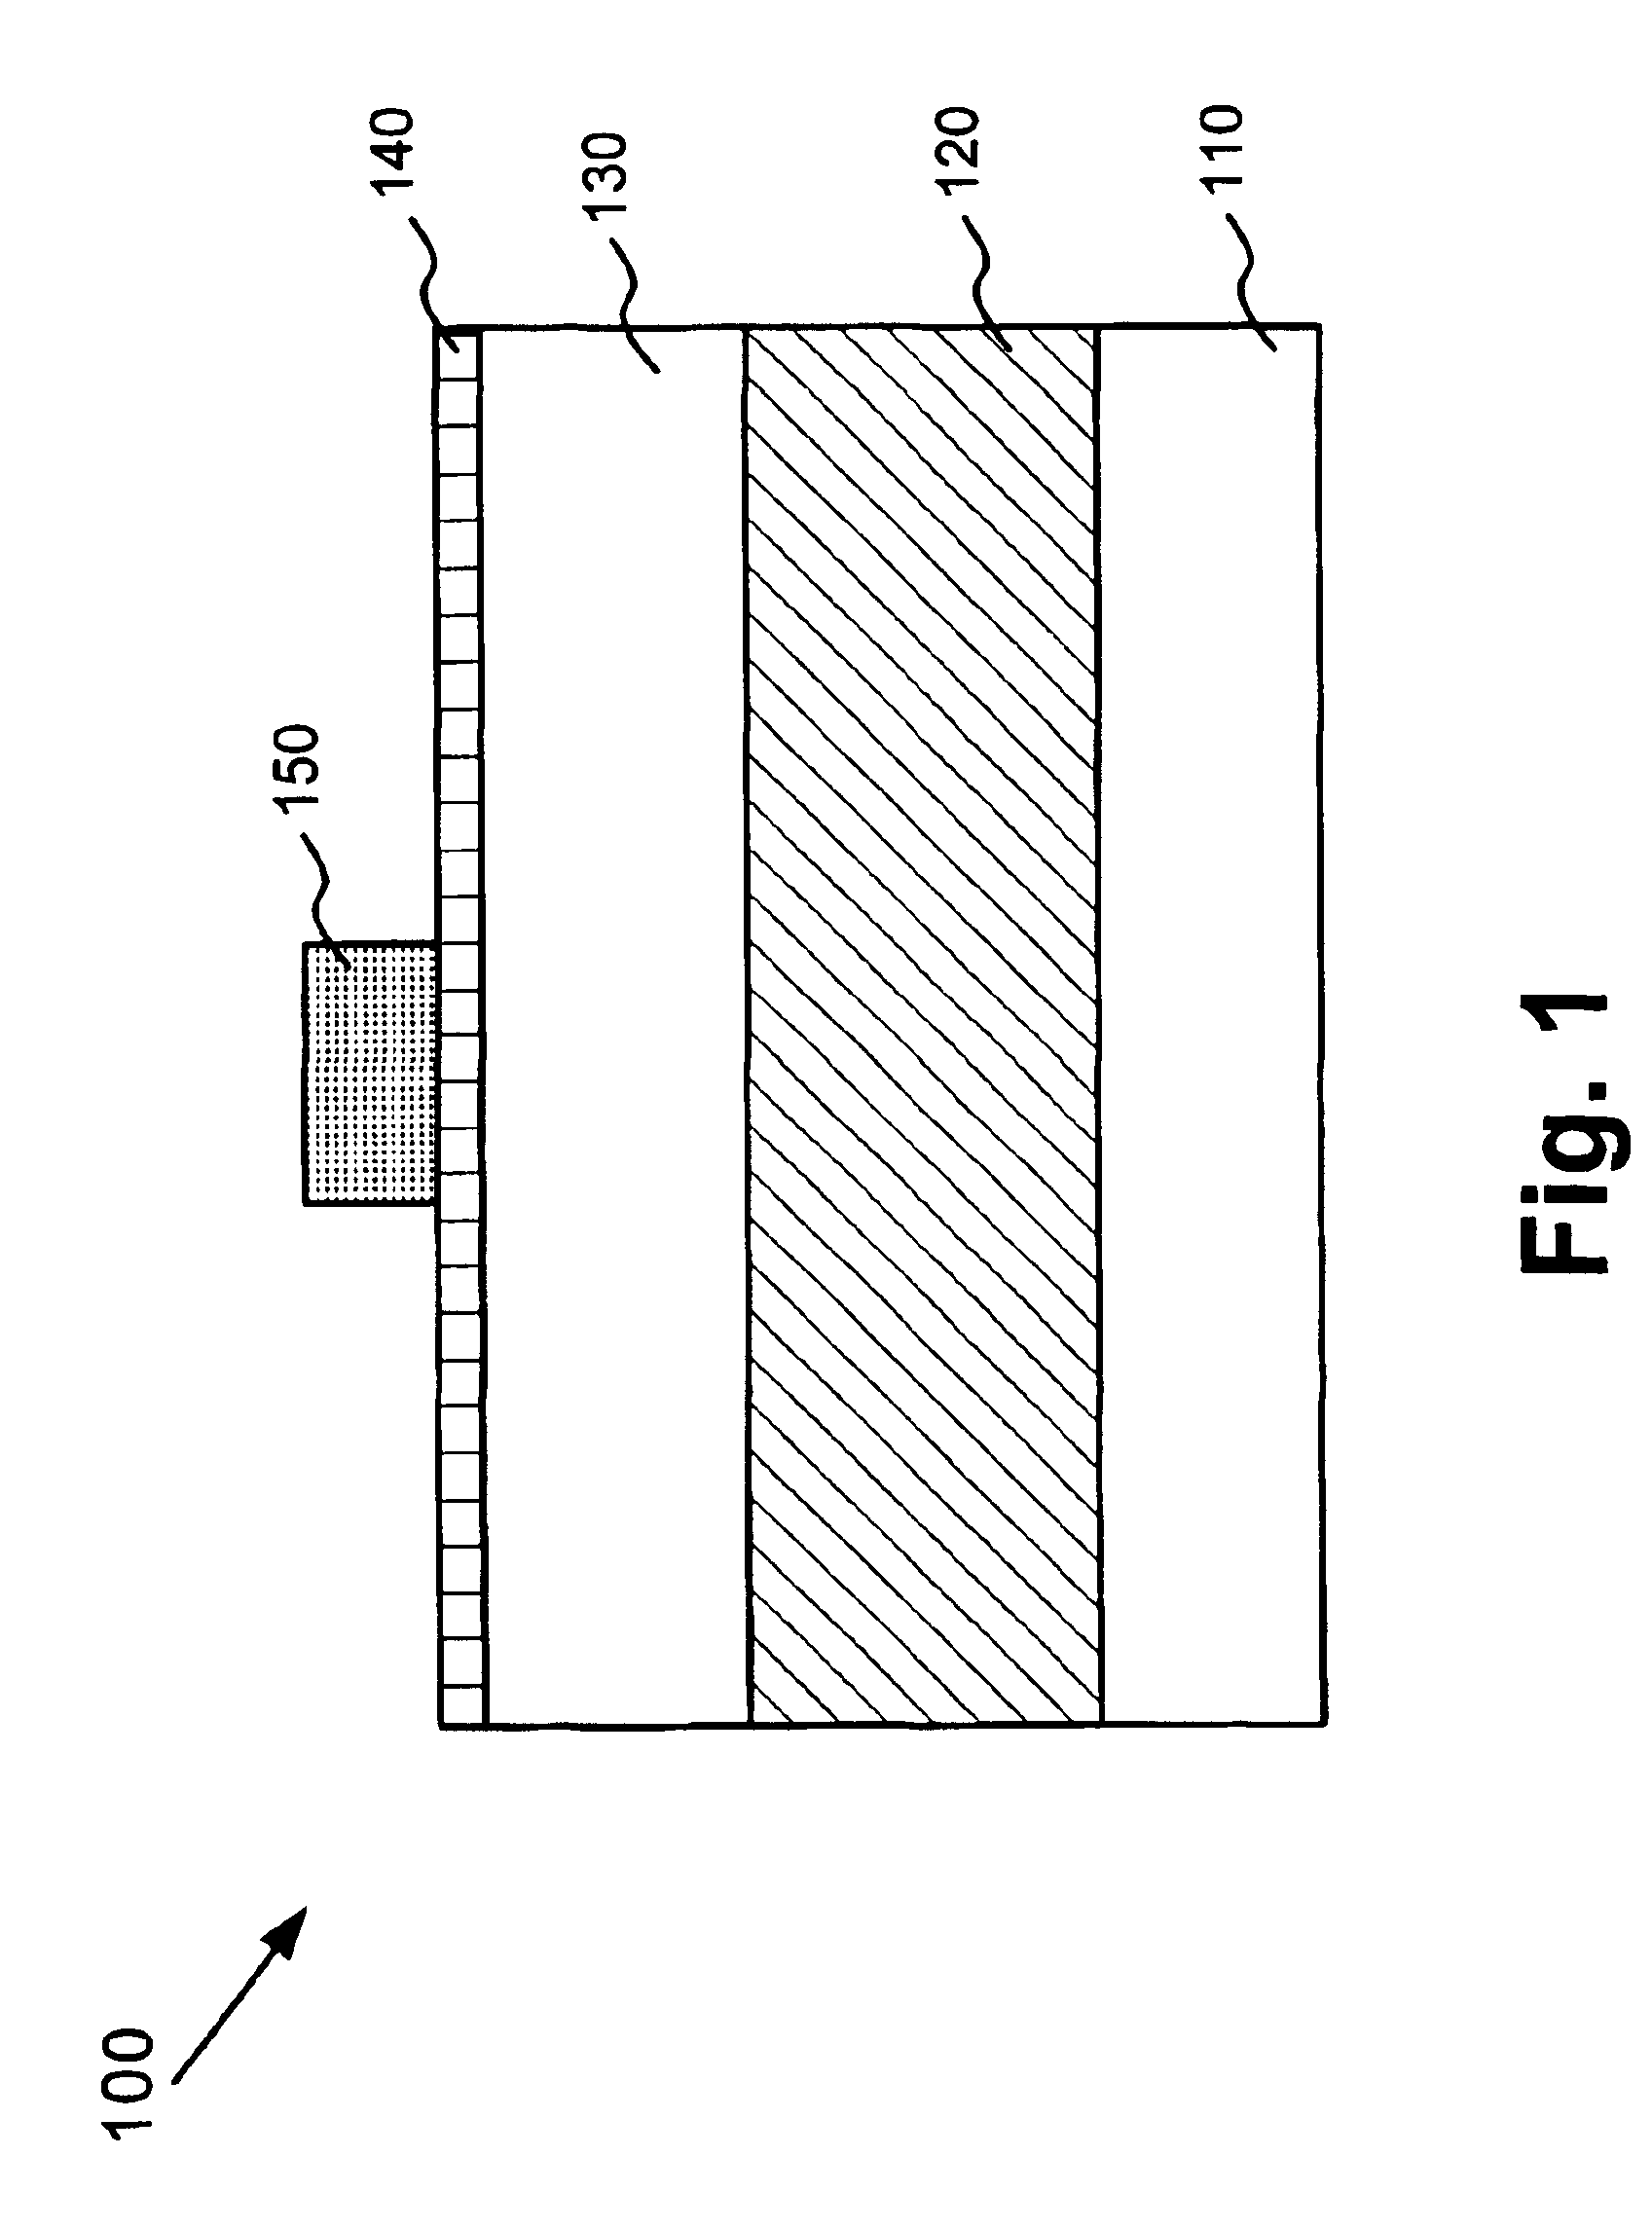 Additional gate control for a double-gate MOSFET